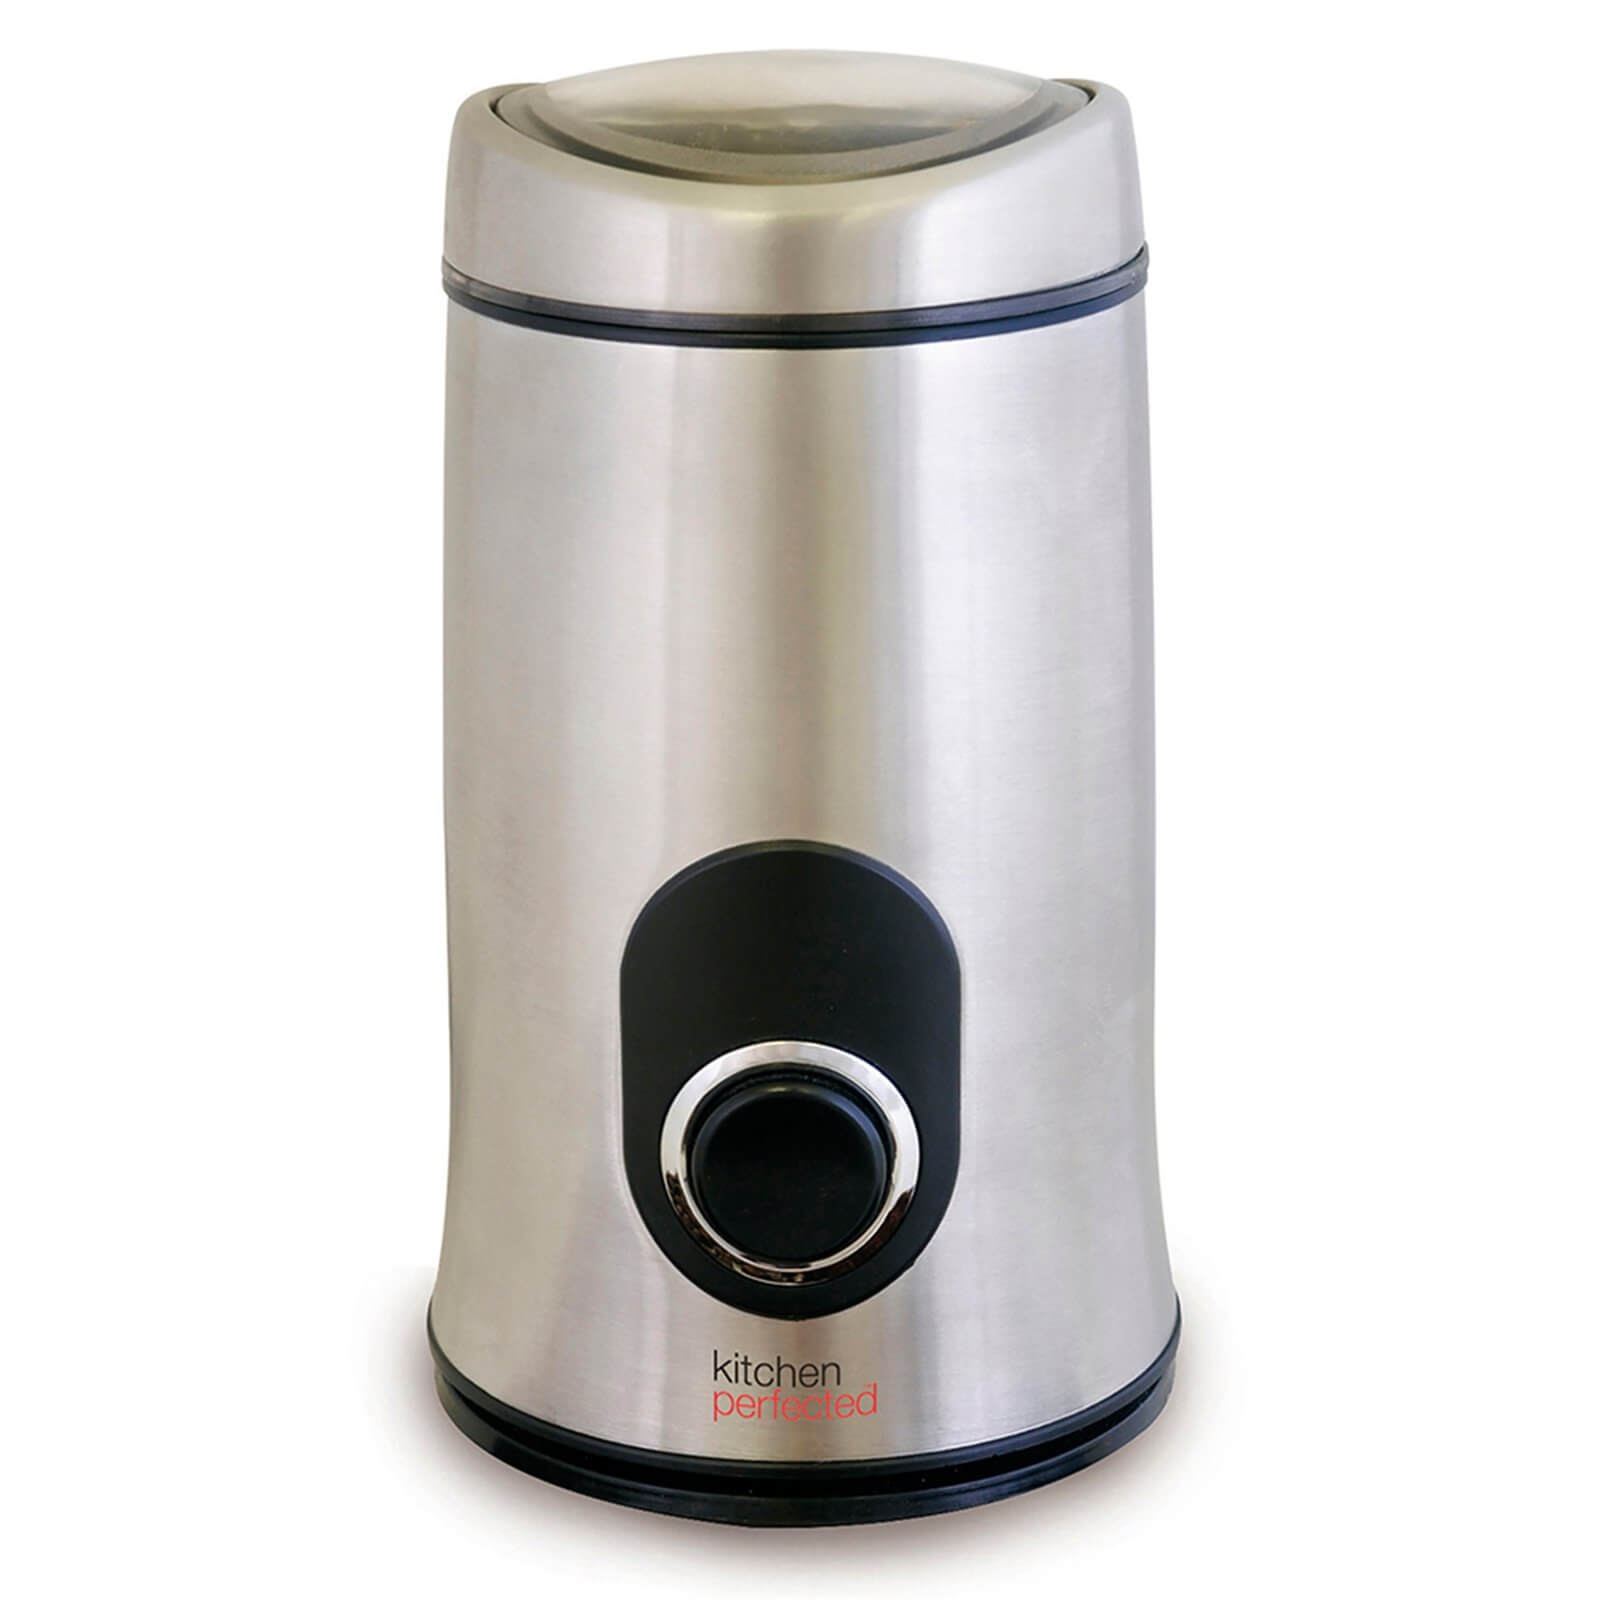 Stainless Steel Coffee/Spice Grinder.